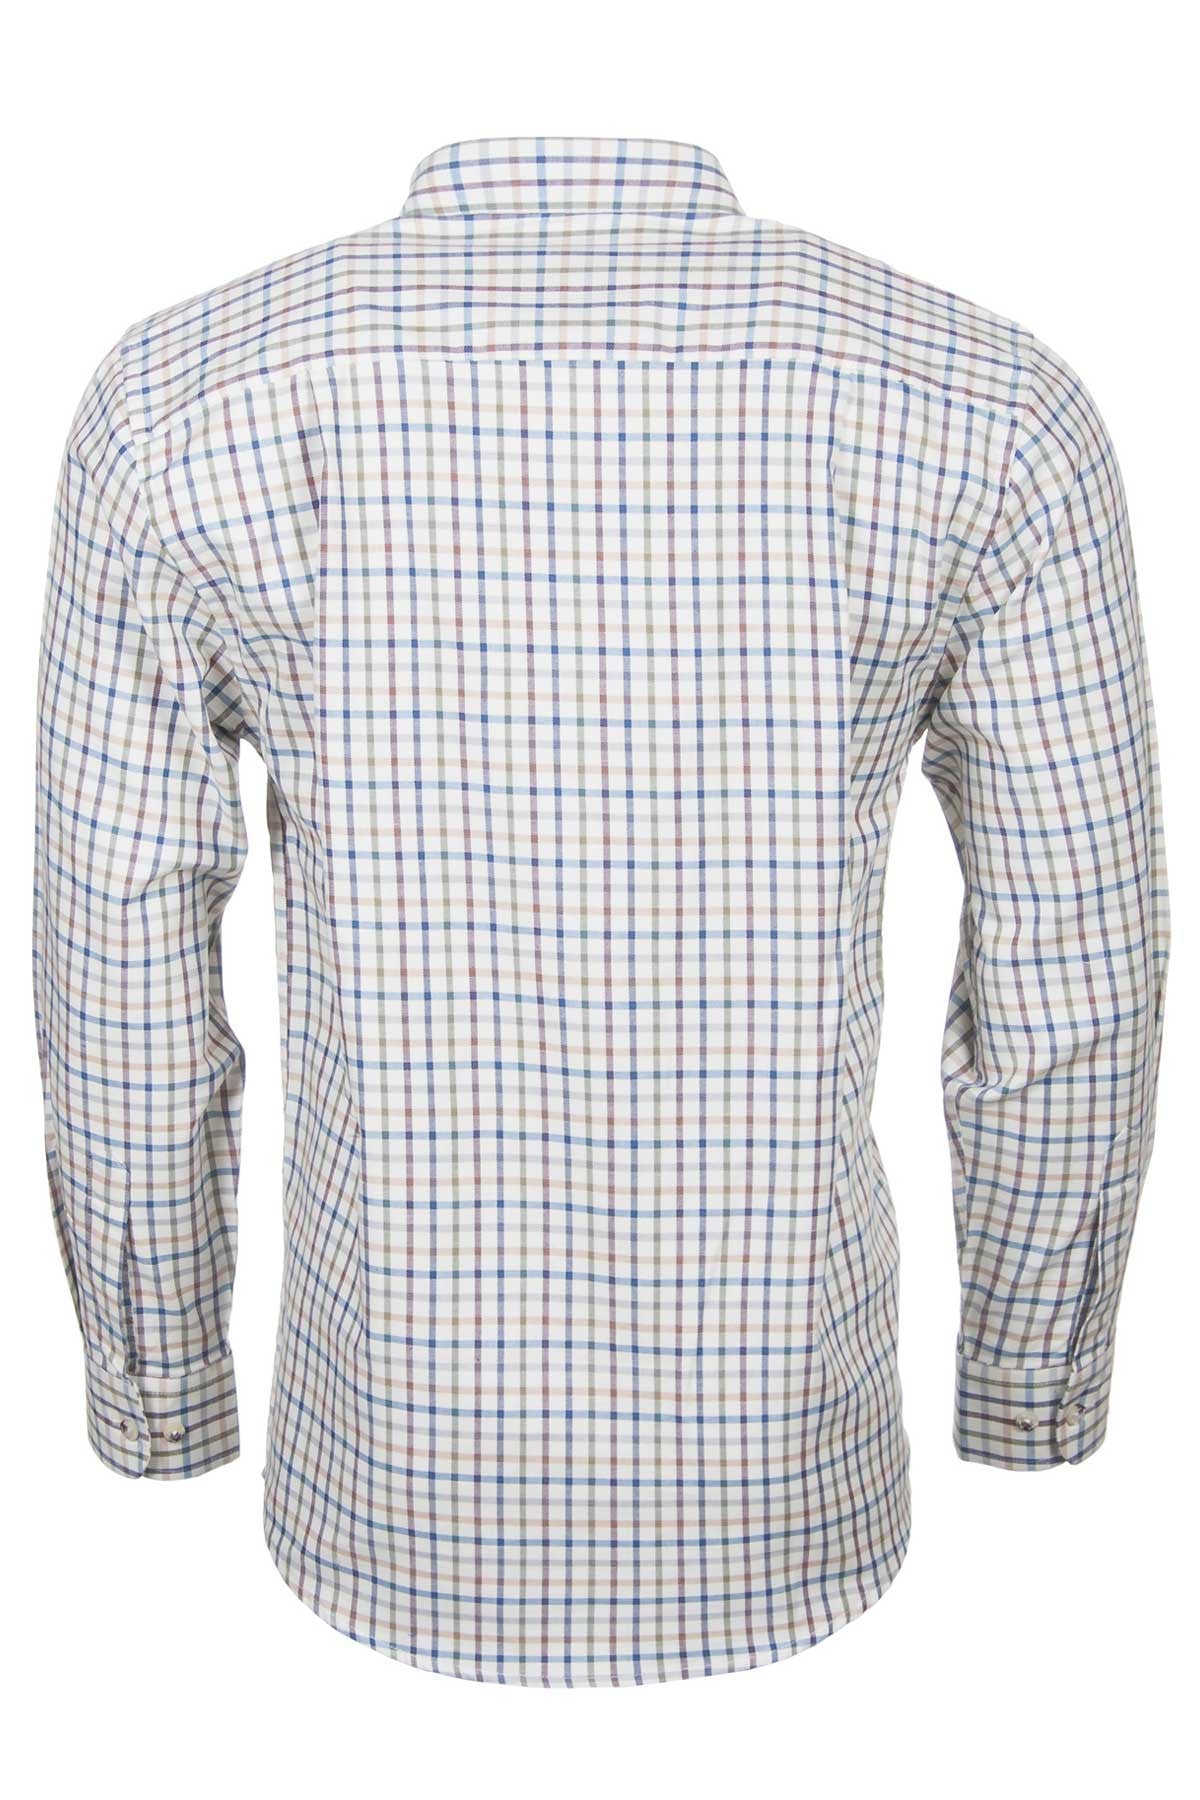 Rydale Mens Harvest Time Cotton Country Check Shirts